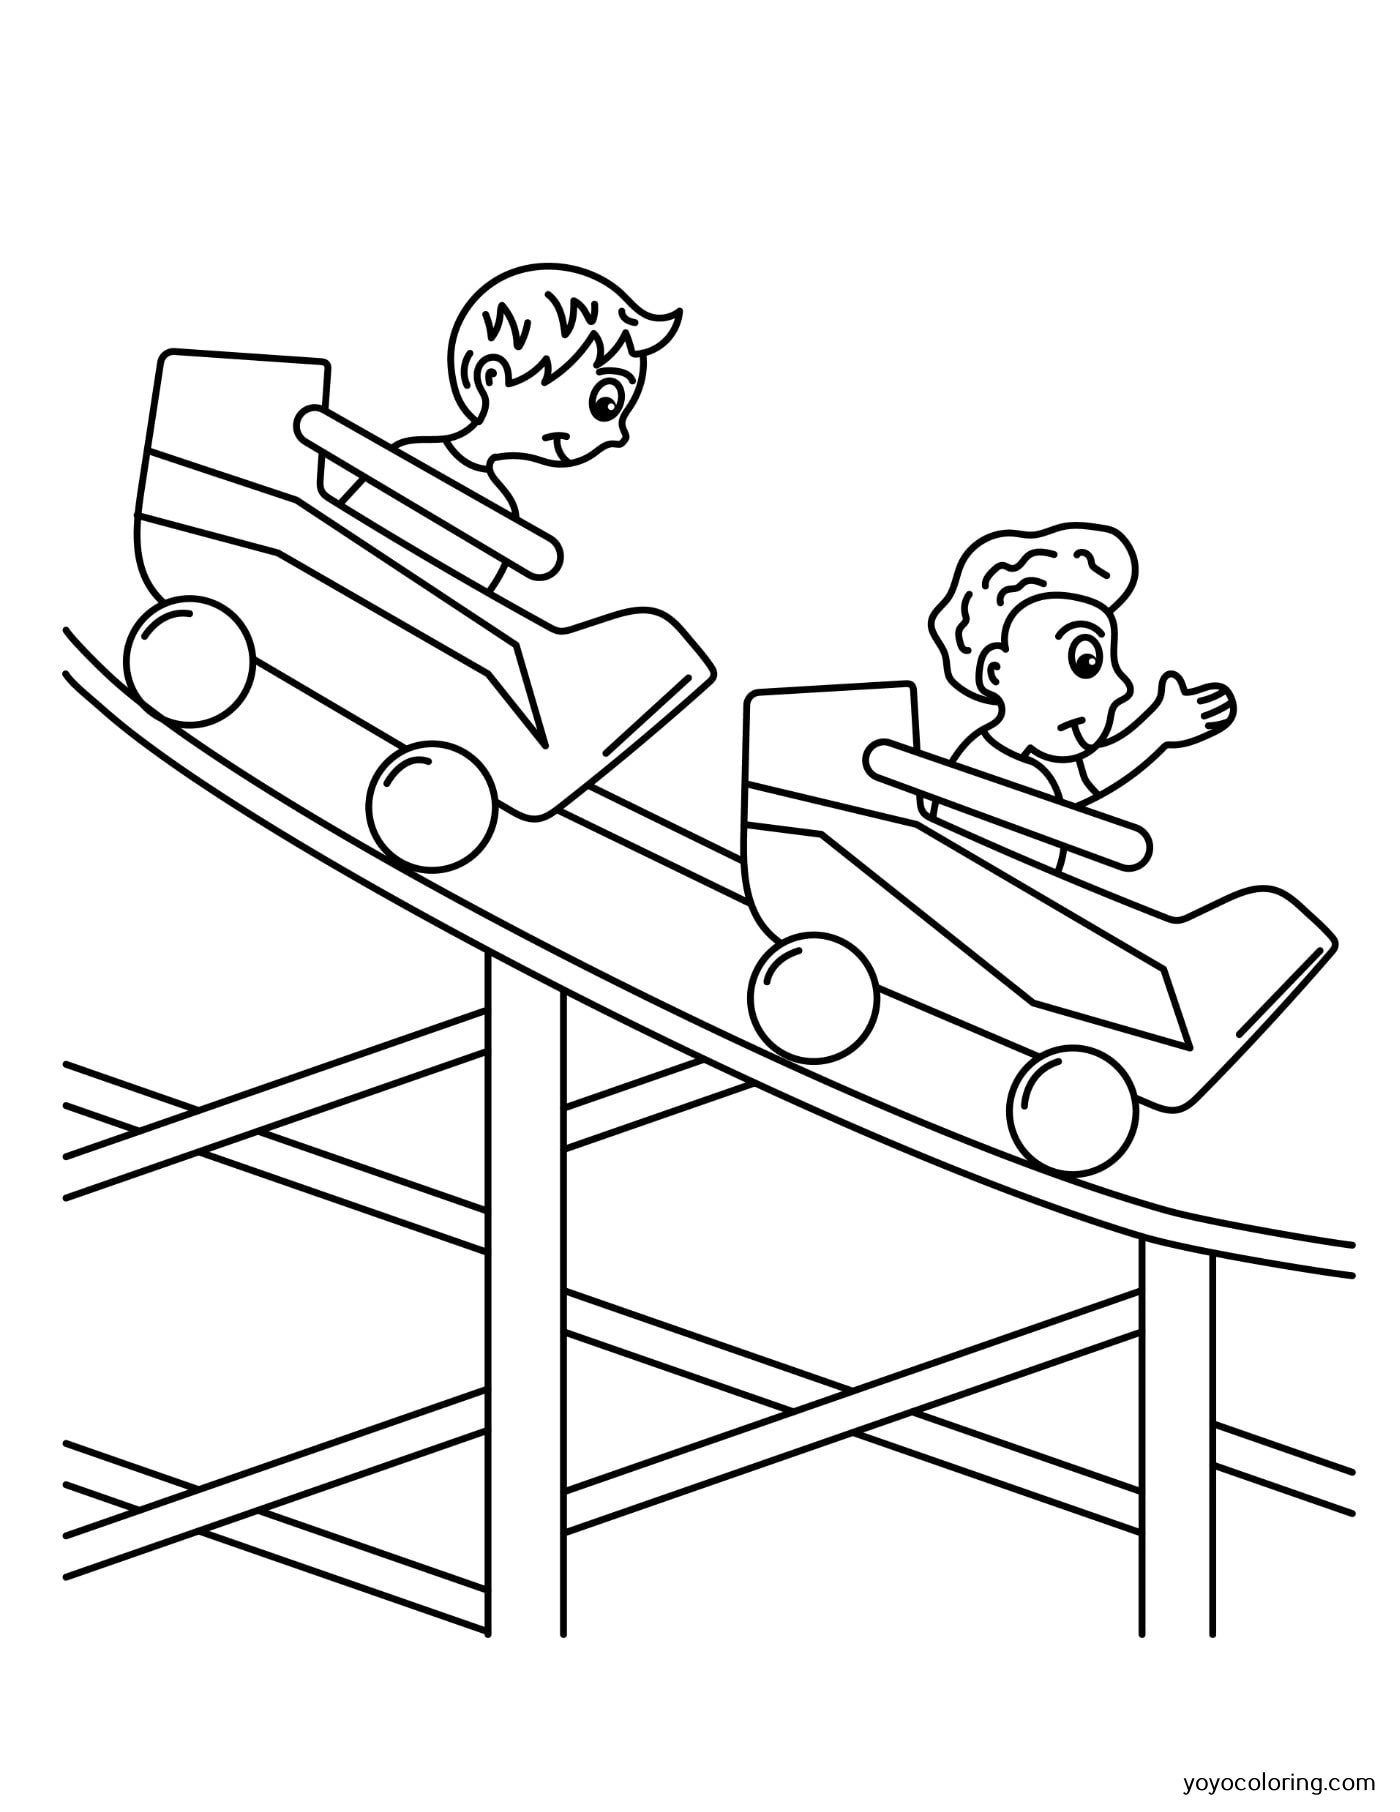 roller-coaster-coloring-pages-printable-painting-template